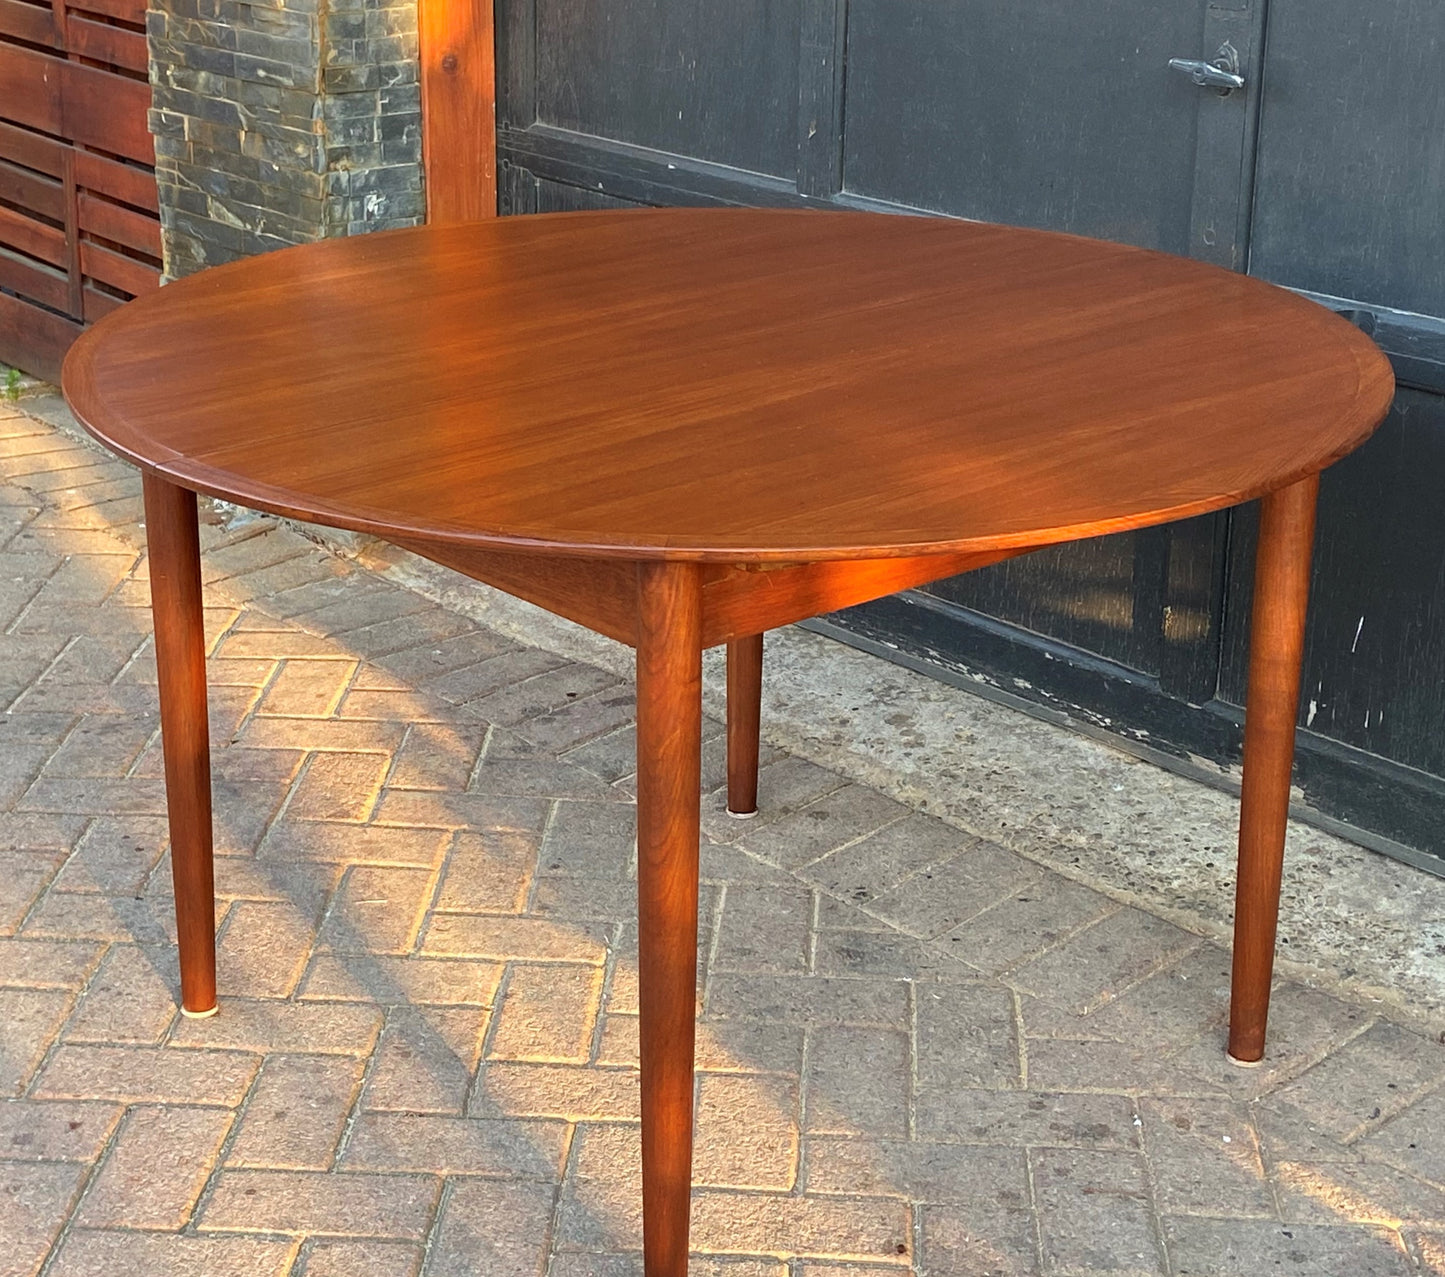 REFINISHED Danish MCM Teak Dining Table Round to Oval w Butterfly Leaf Selfstoring 48"-71"